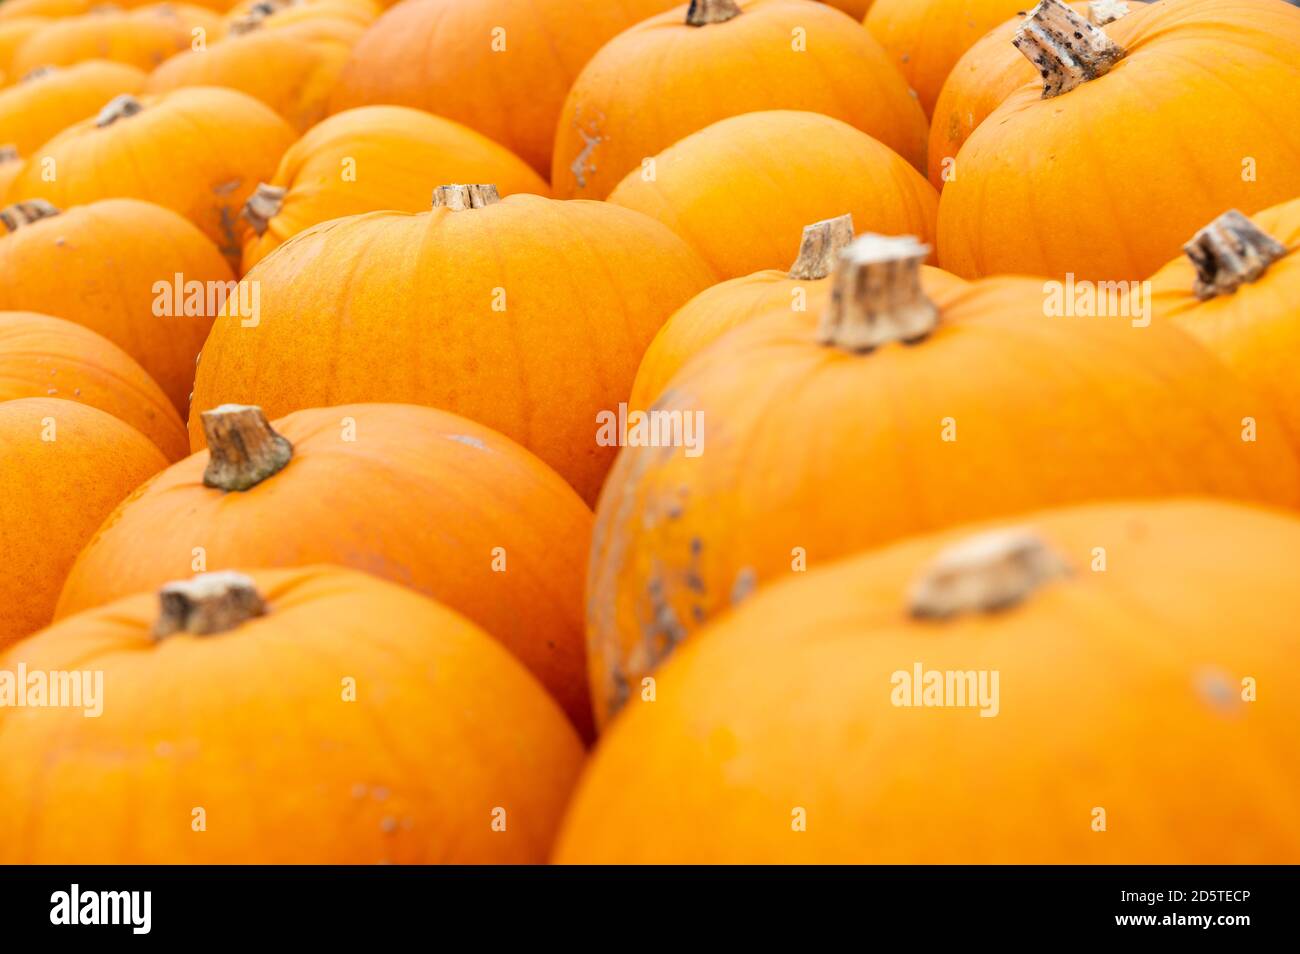 Totton, Hampshire, 10 Oct, 2020. Lots of pumpkins that have been placed together ready to sell to pumpkin patch visitors sit on the ground tightly pac Stock Photo